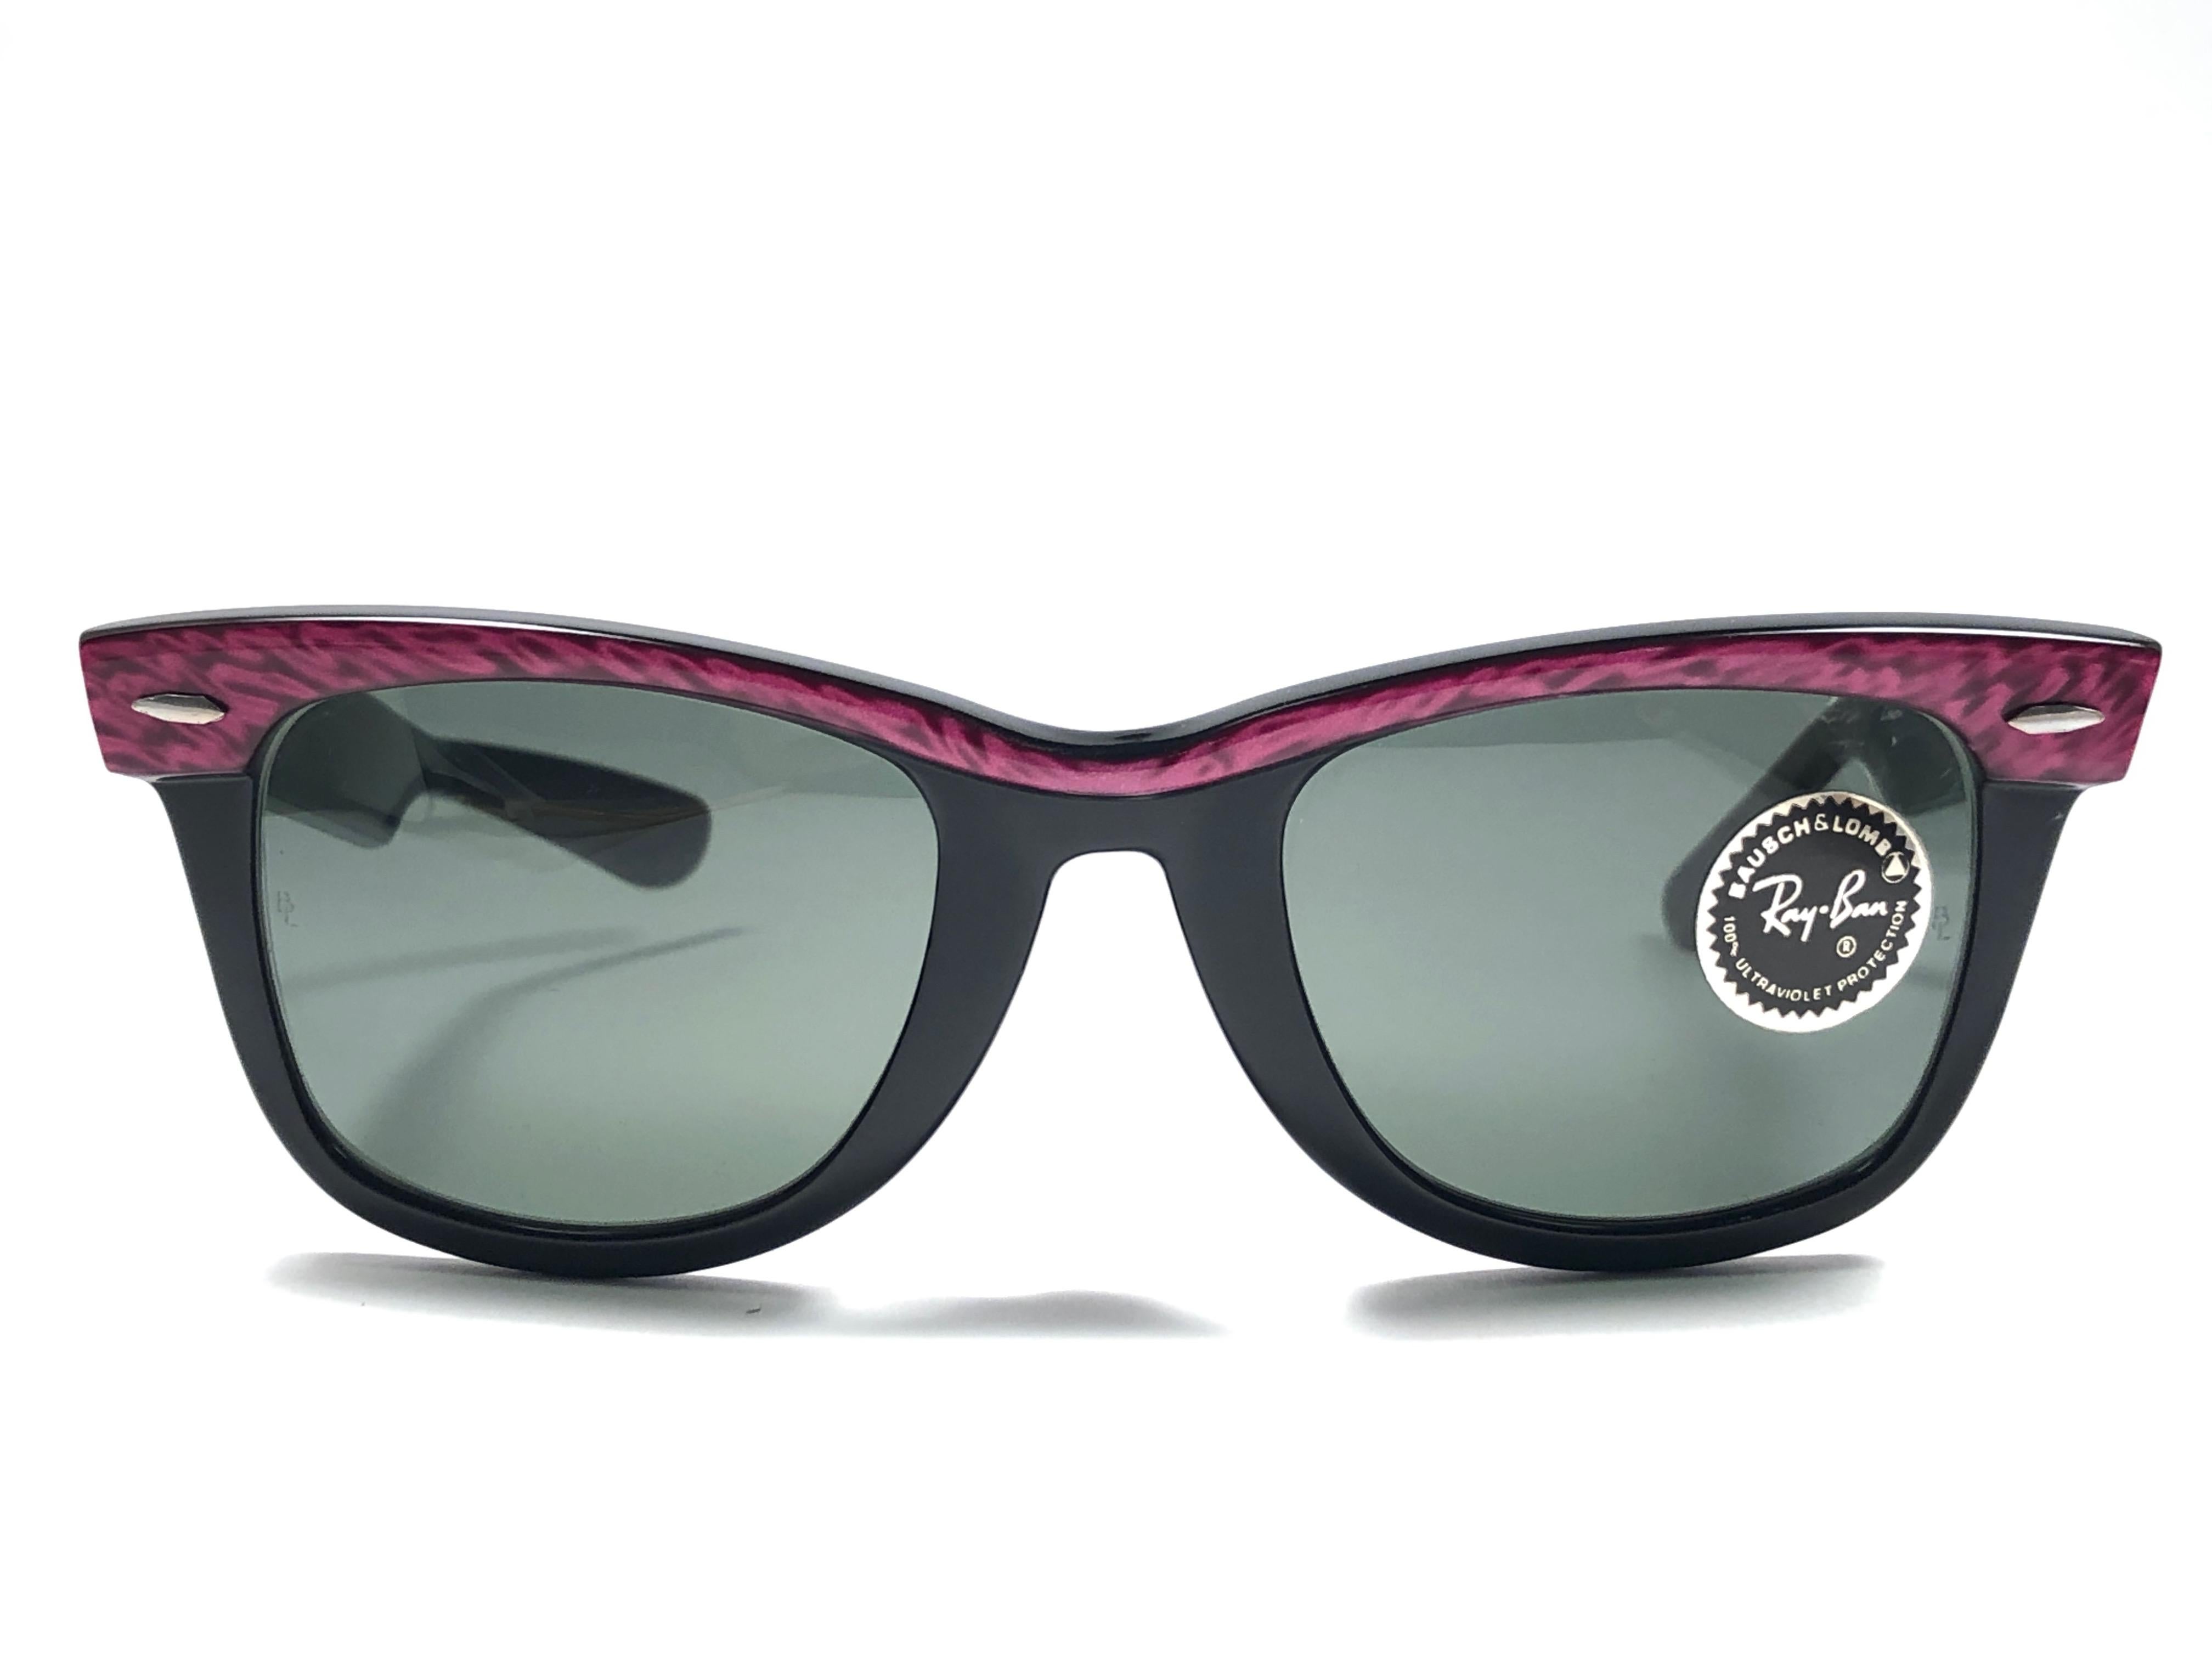 New classic Wayfarer in fuchsia & black. B&L etched in both G15 grey lenses. Please notice that this item is nearly 40 years old and could show some storage wear.  
New, ever worn or displayed.